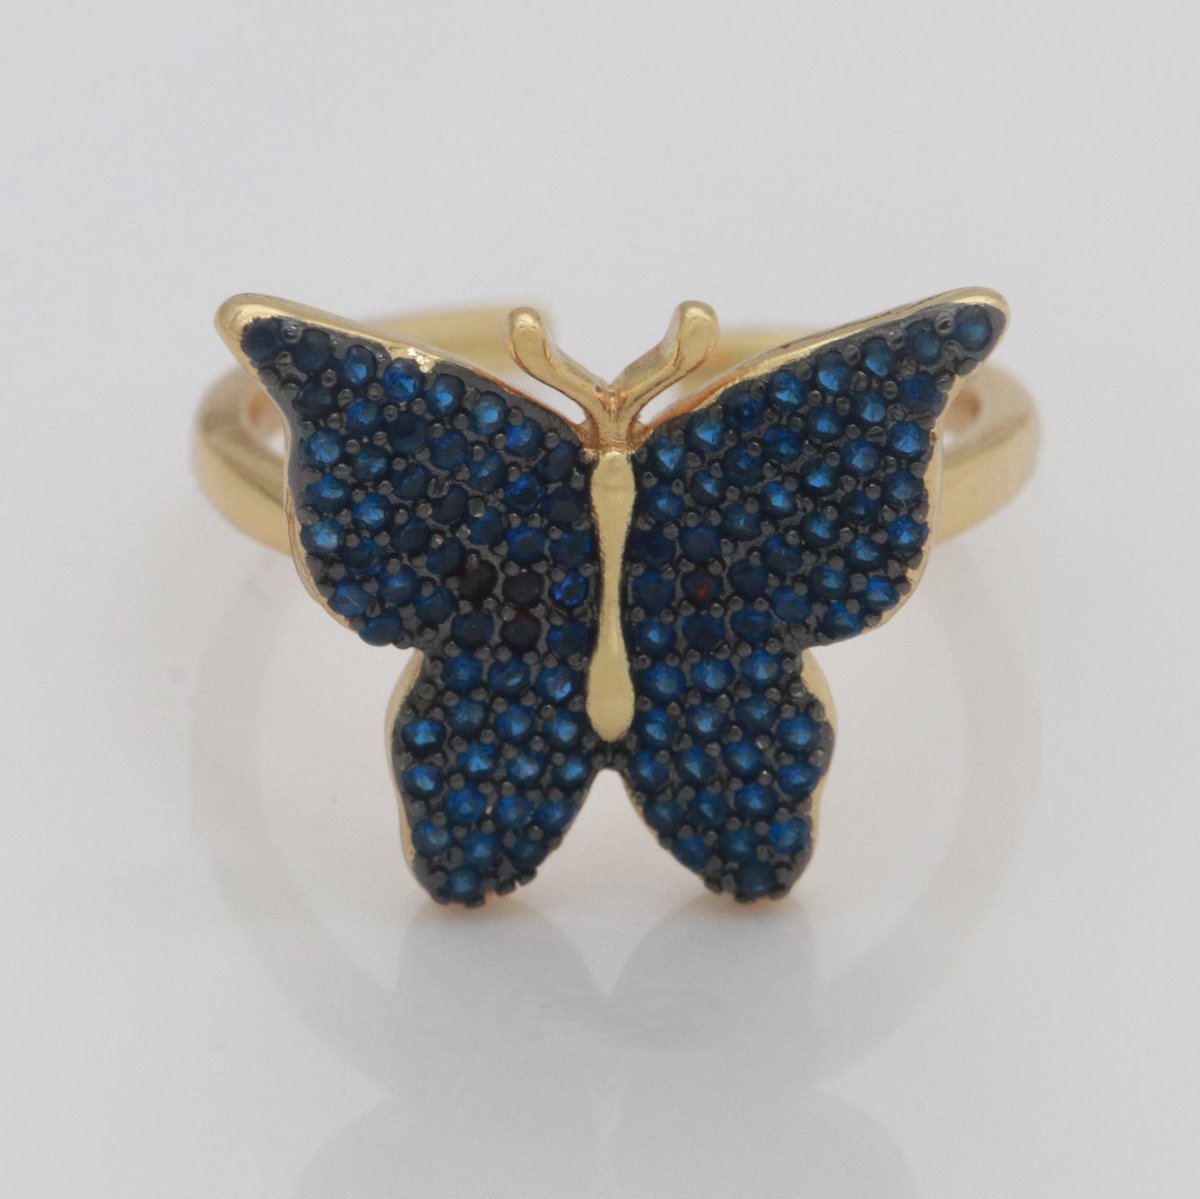 CZ Micro pave Colorful Enamel Butterfly Shape Adjustable Ring,14K Gold Filled CZ Open Ring Adjustable Statement Ring - DLUXCA